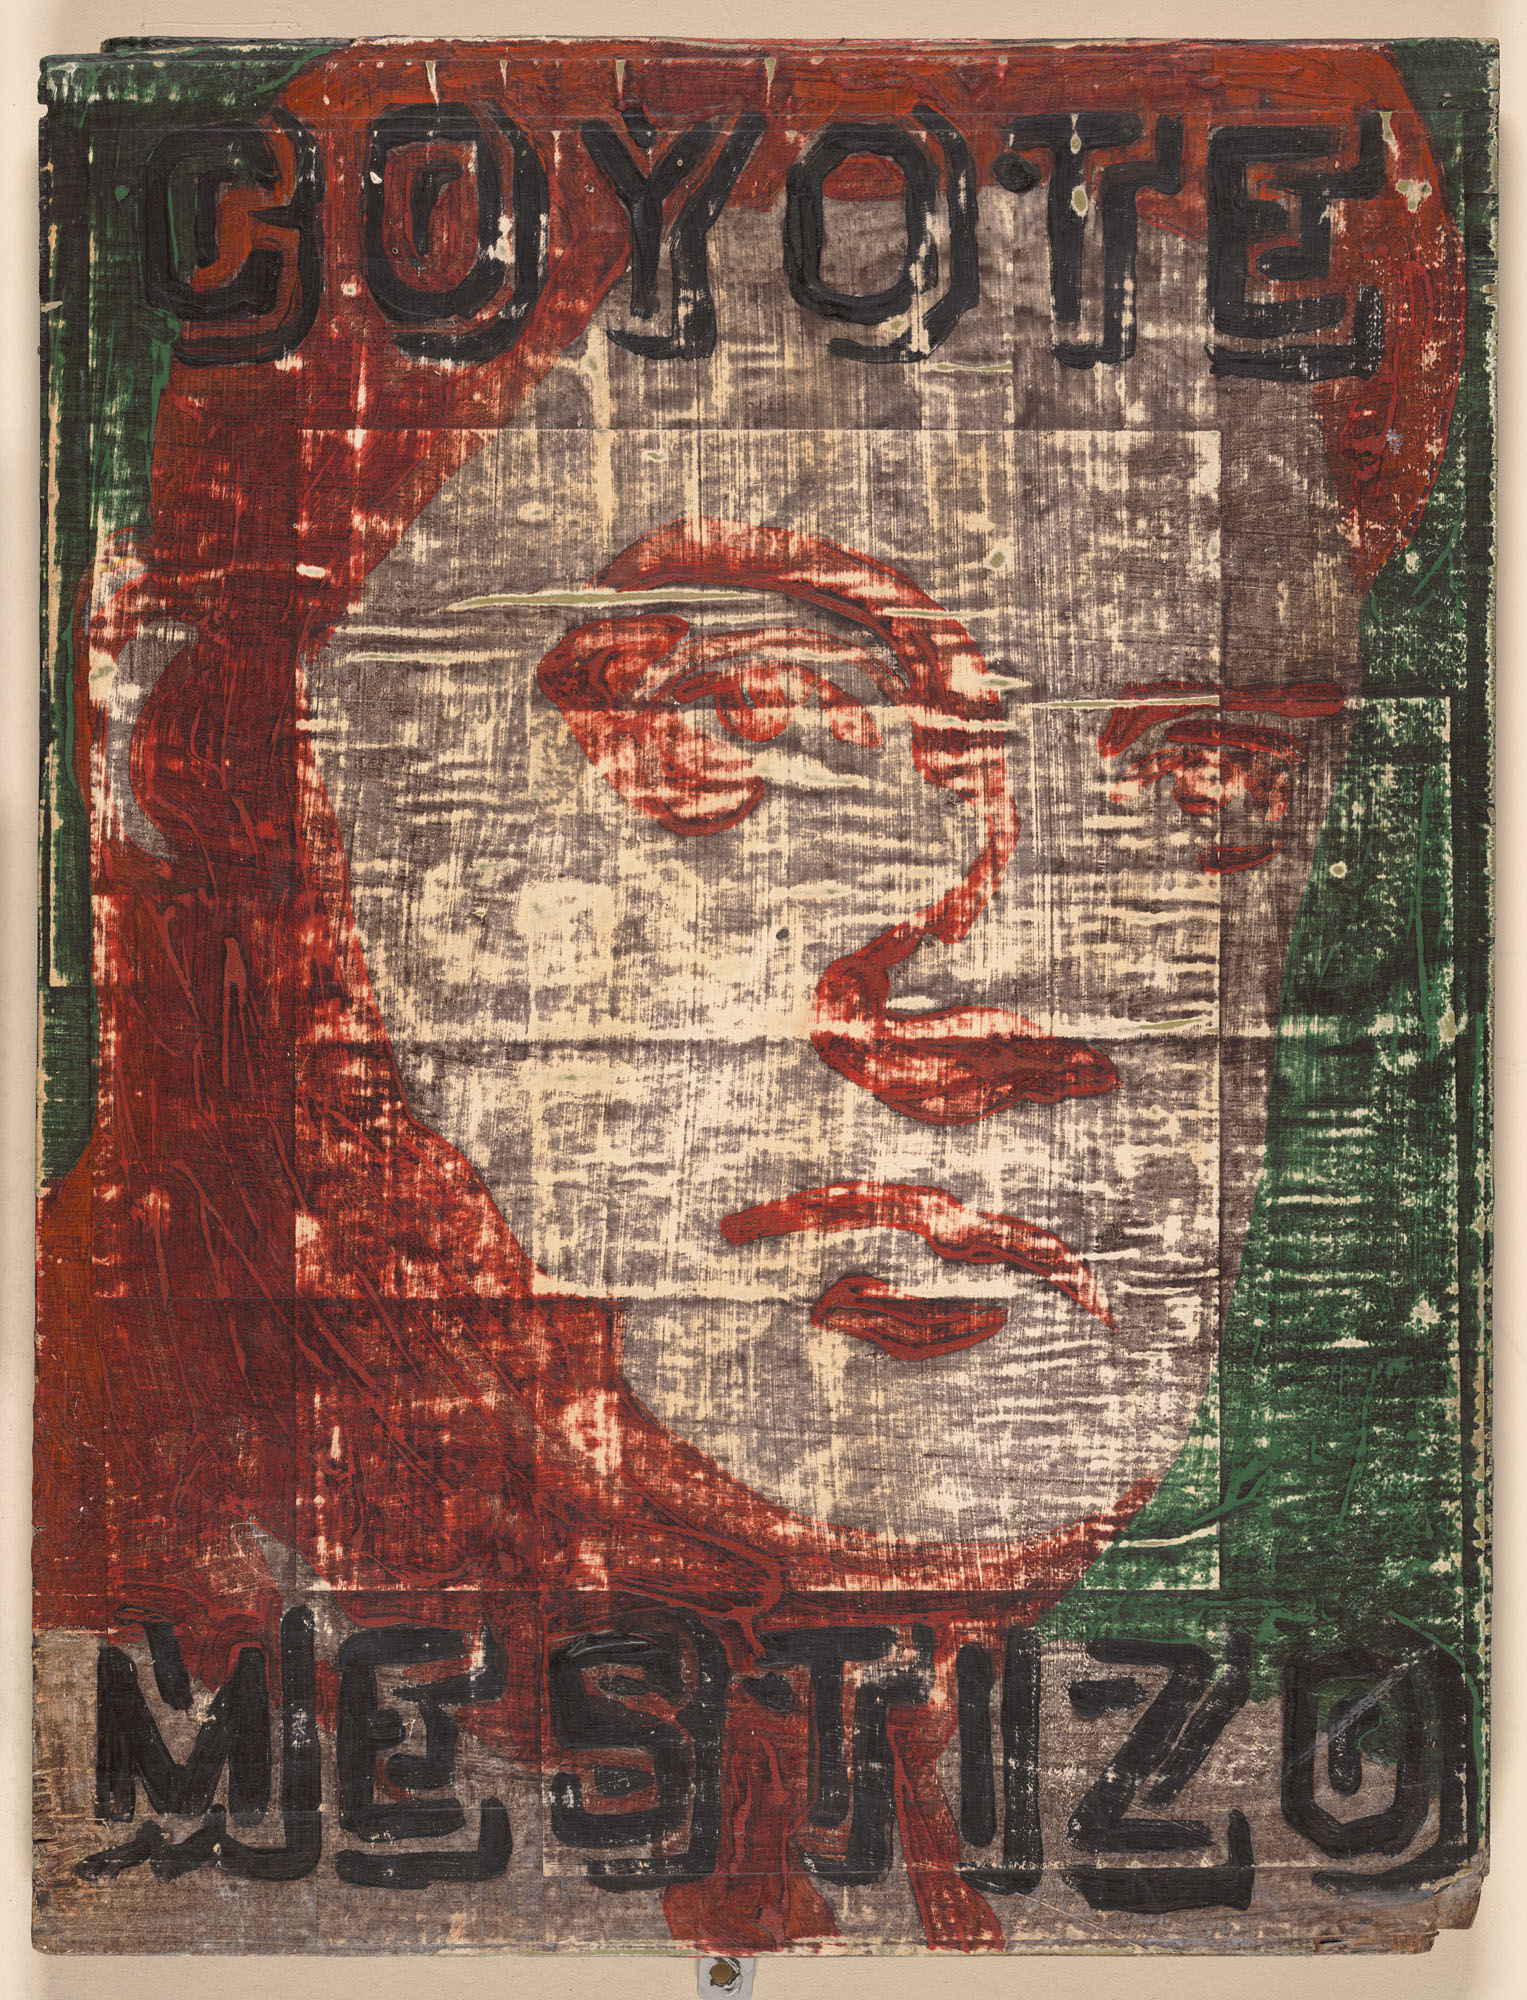 Poster of male figure with words 'Coyote' and "Mestizo'